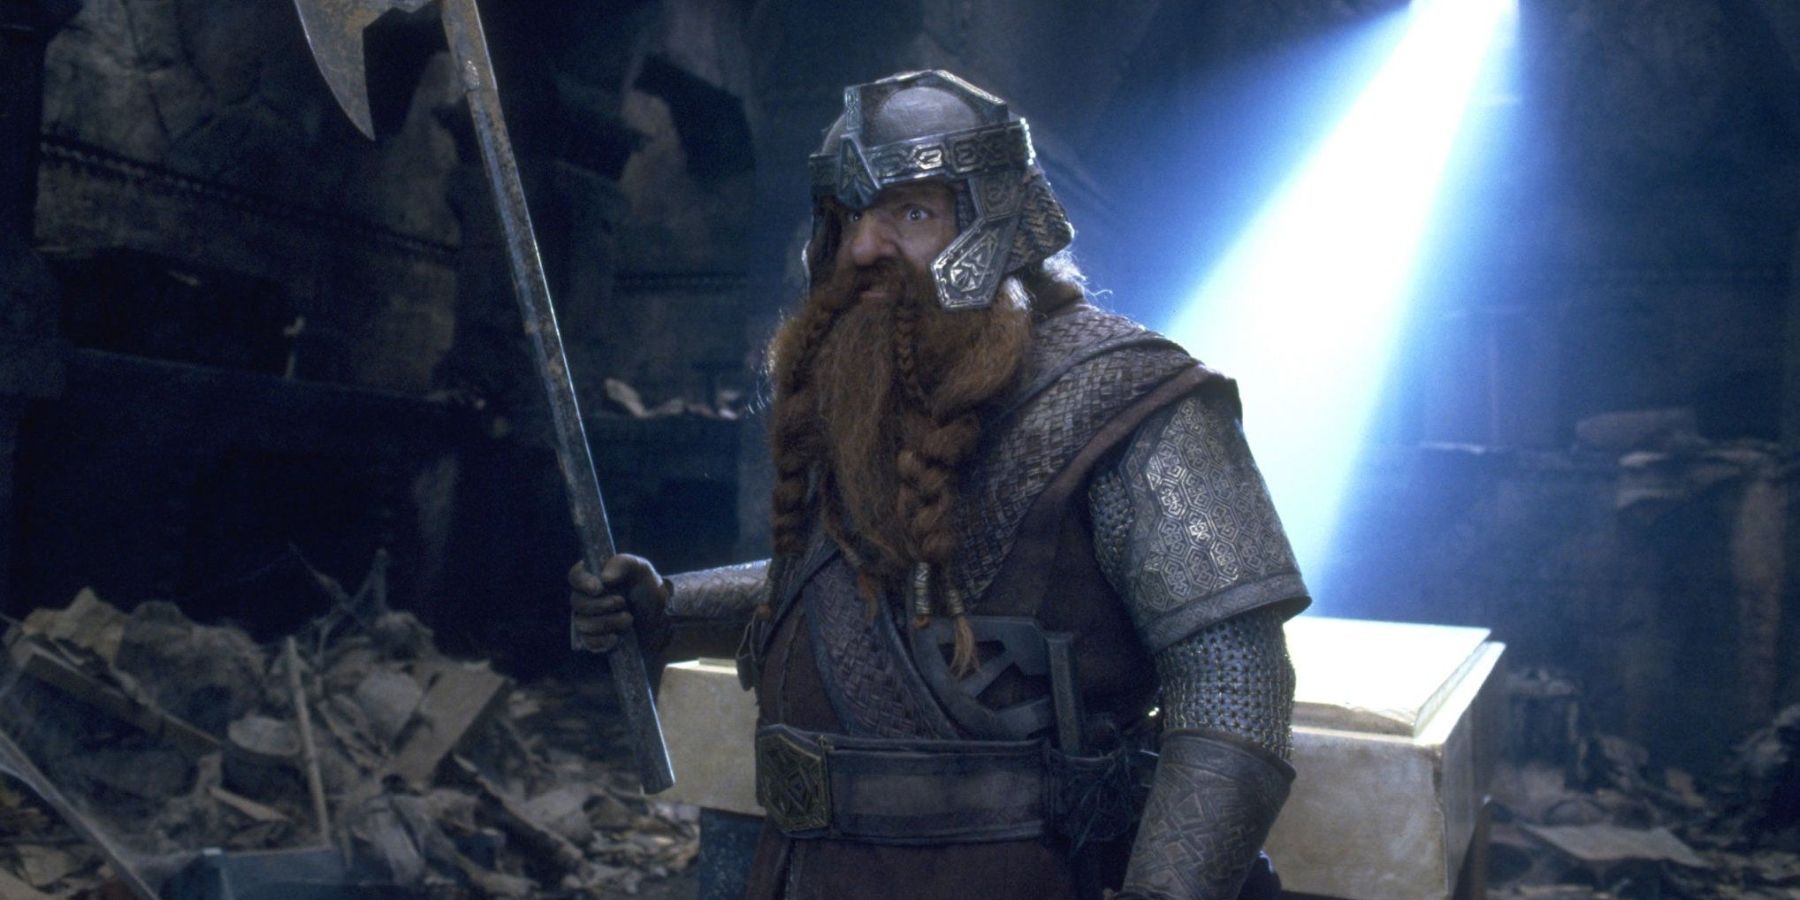 gimli angry at dwarven deaths